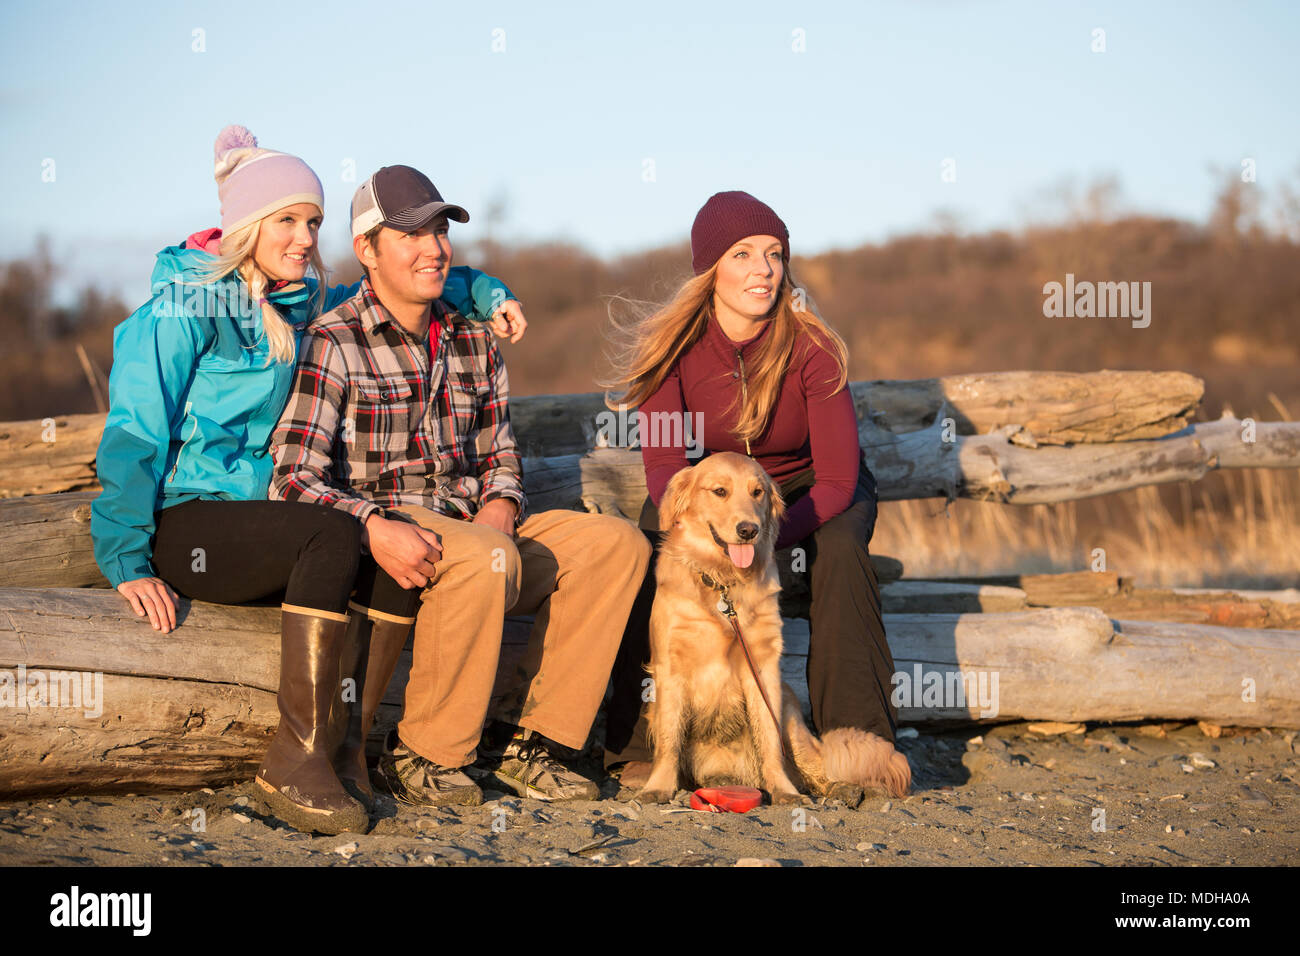 A young couple and a friend with a dog sit on a piece of driftwood on a beach looking out to the ocean at sunset Stock Photo